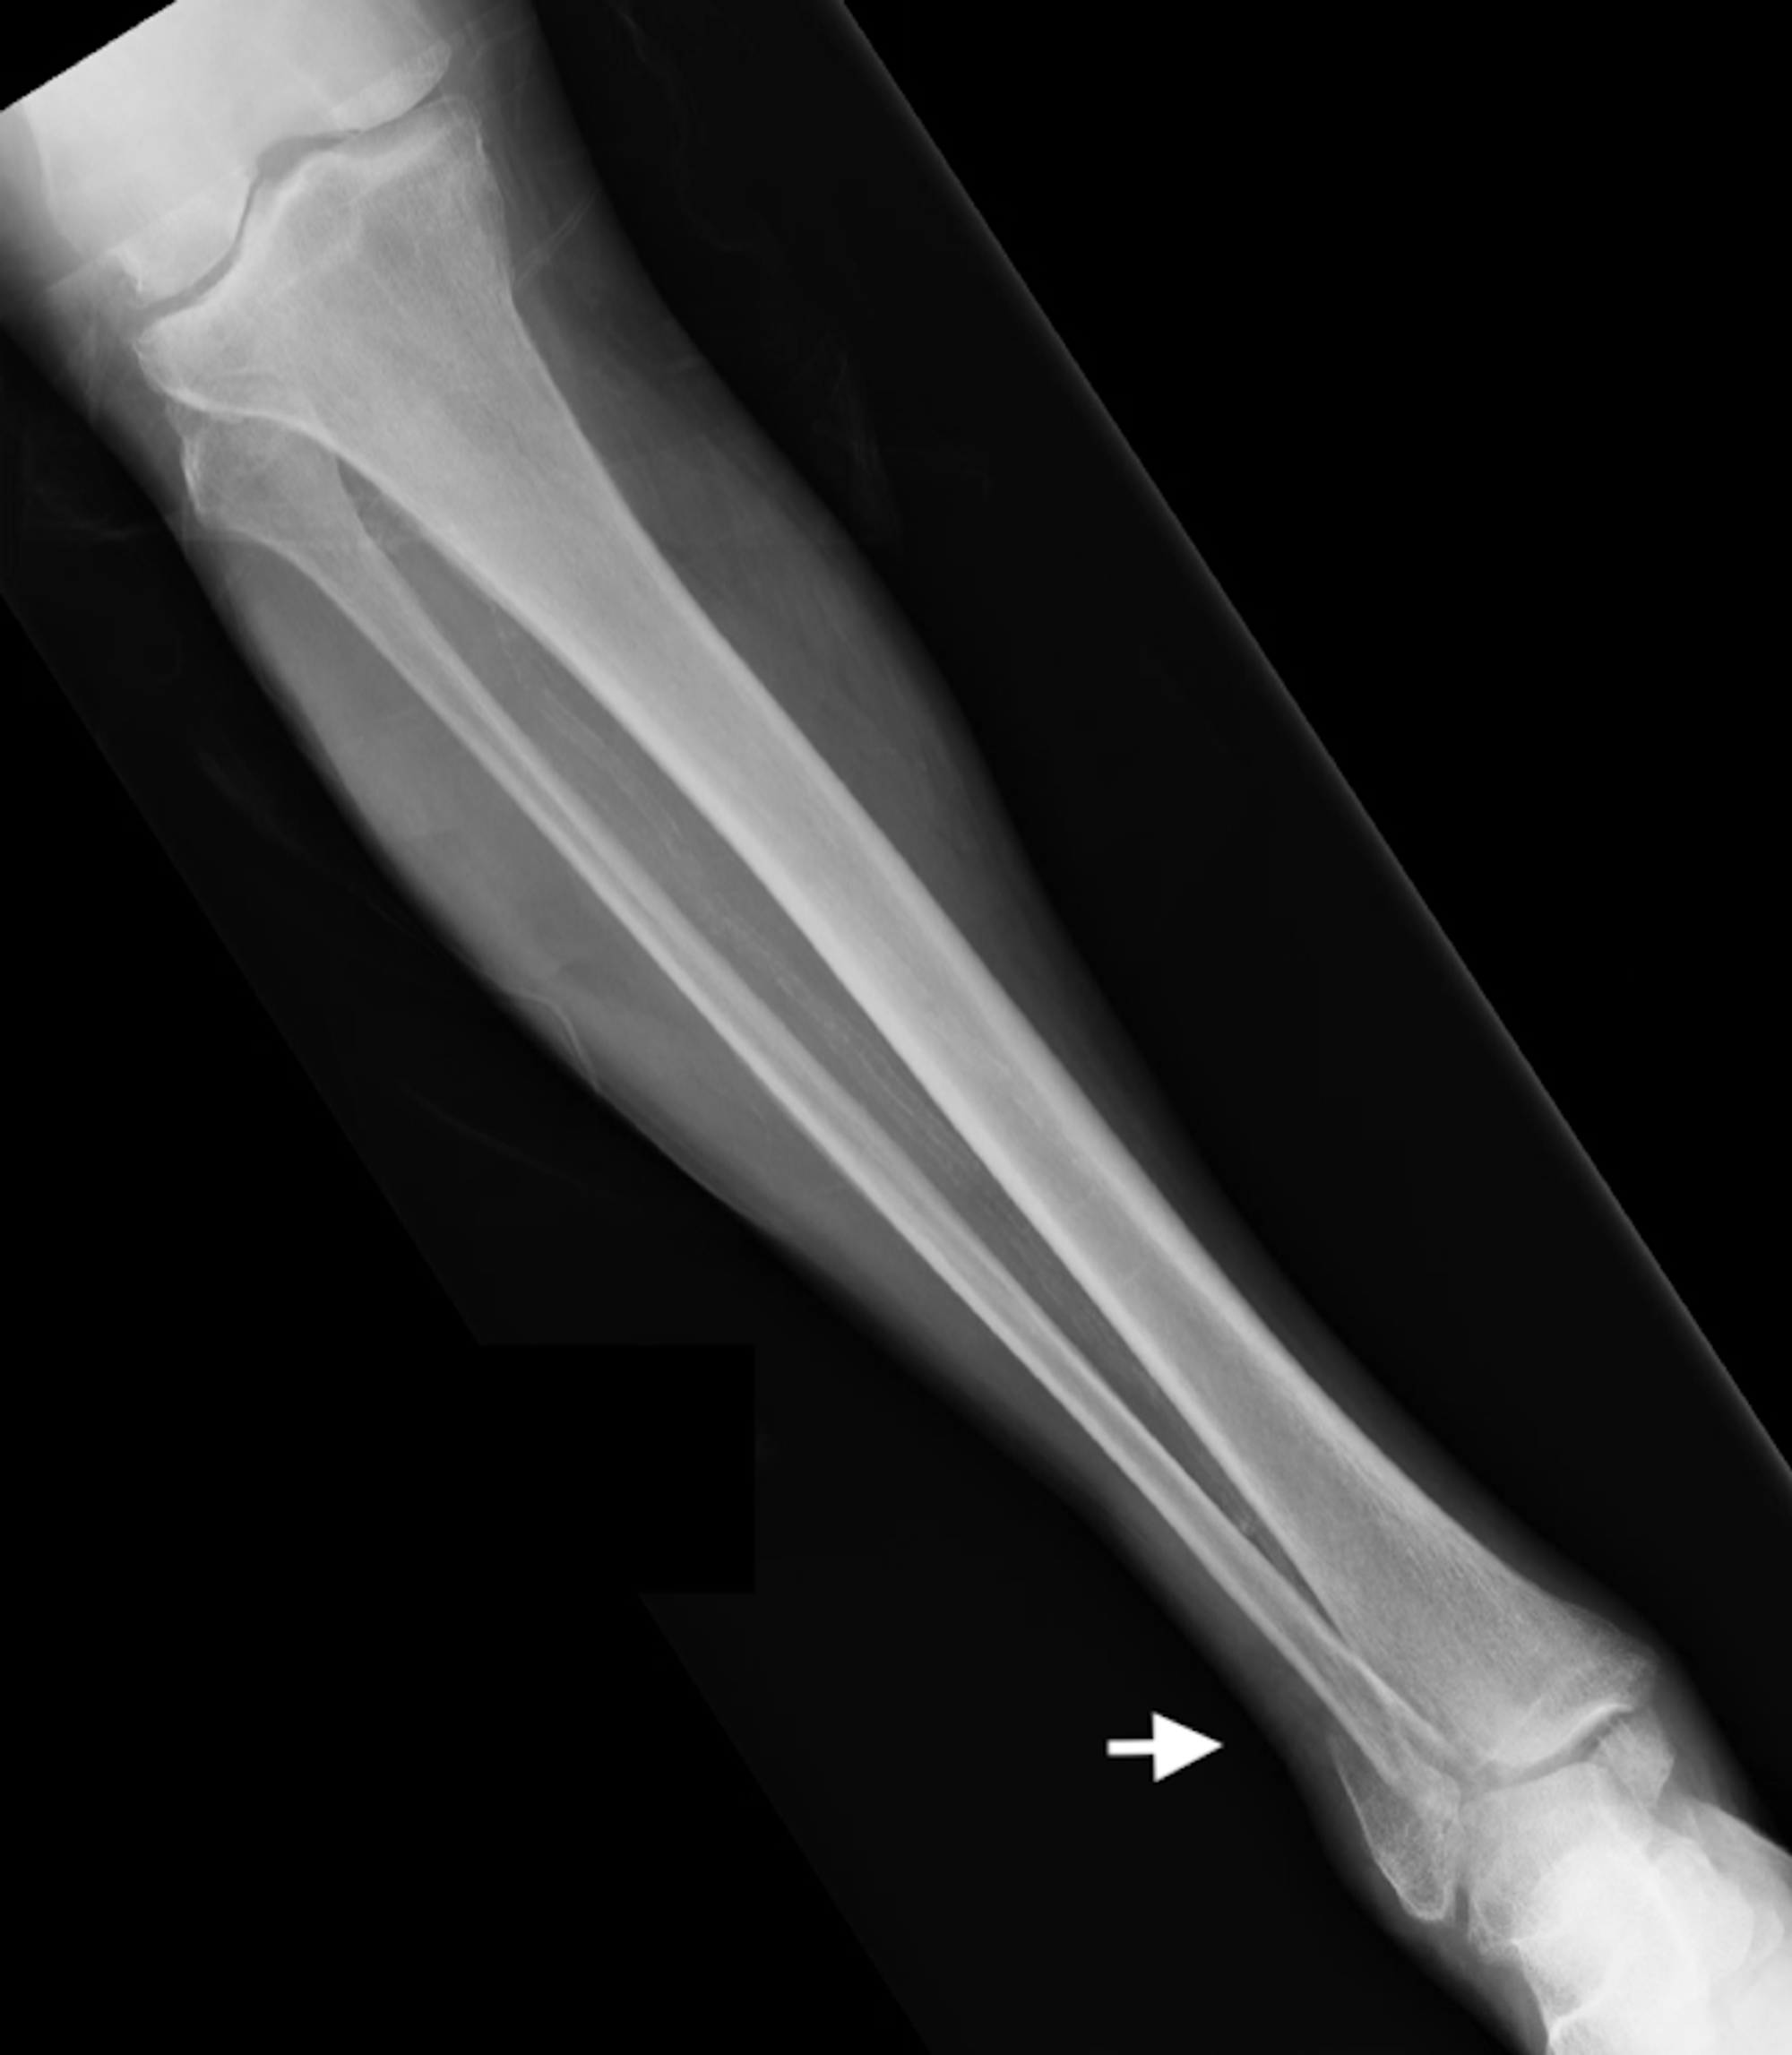 hairline fracture in shin